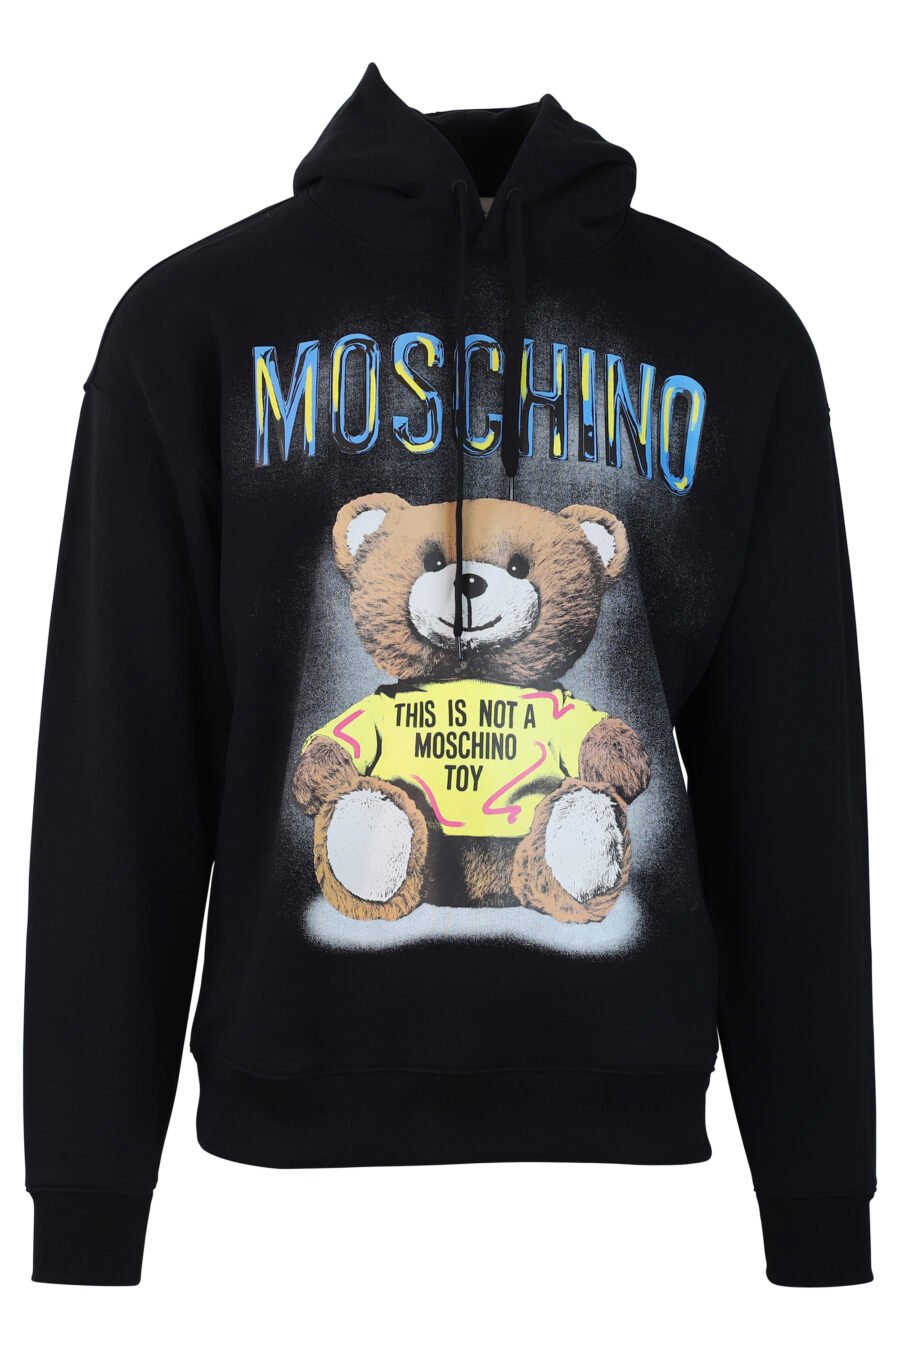 Sweat noir avec capuche et ours maxilogo "this is not a moschino toy" - IMG 0709